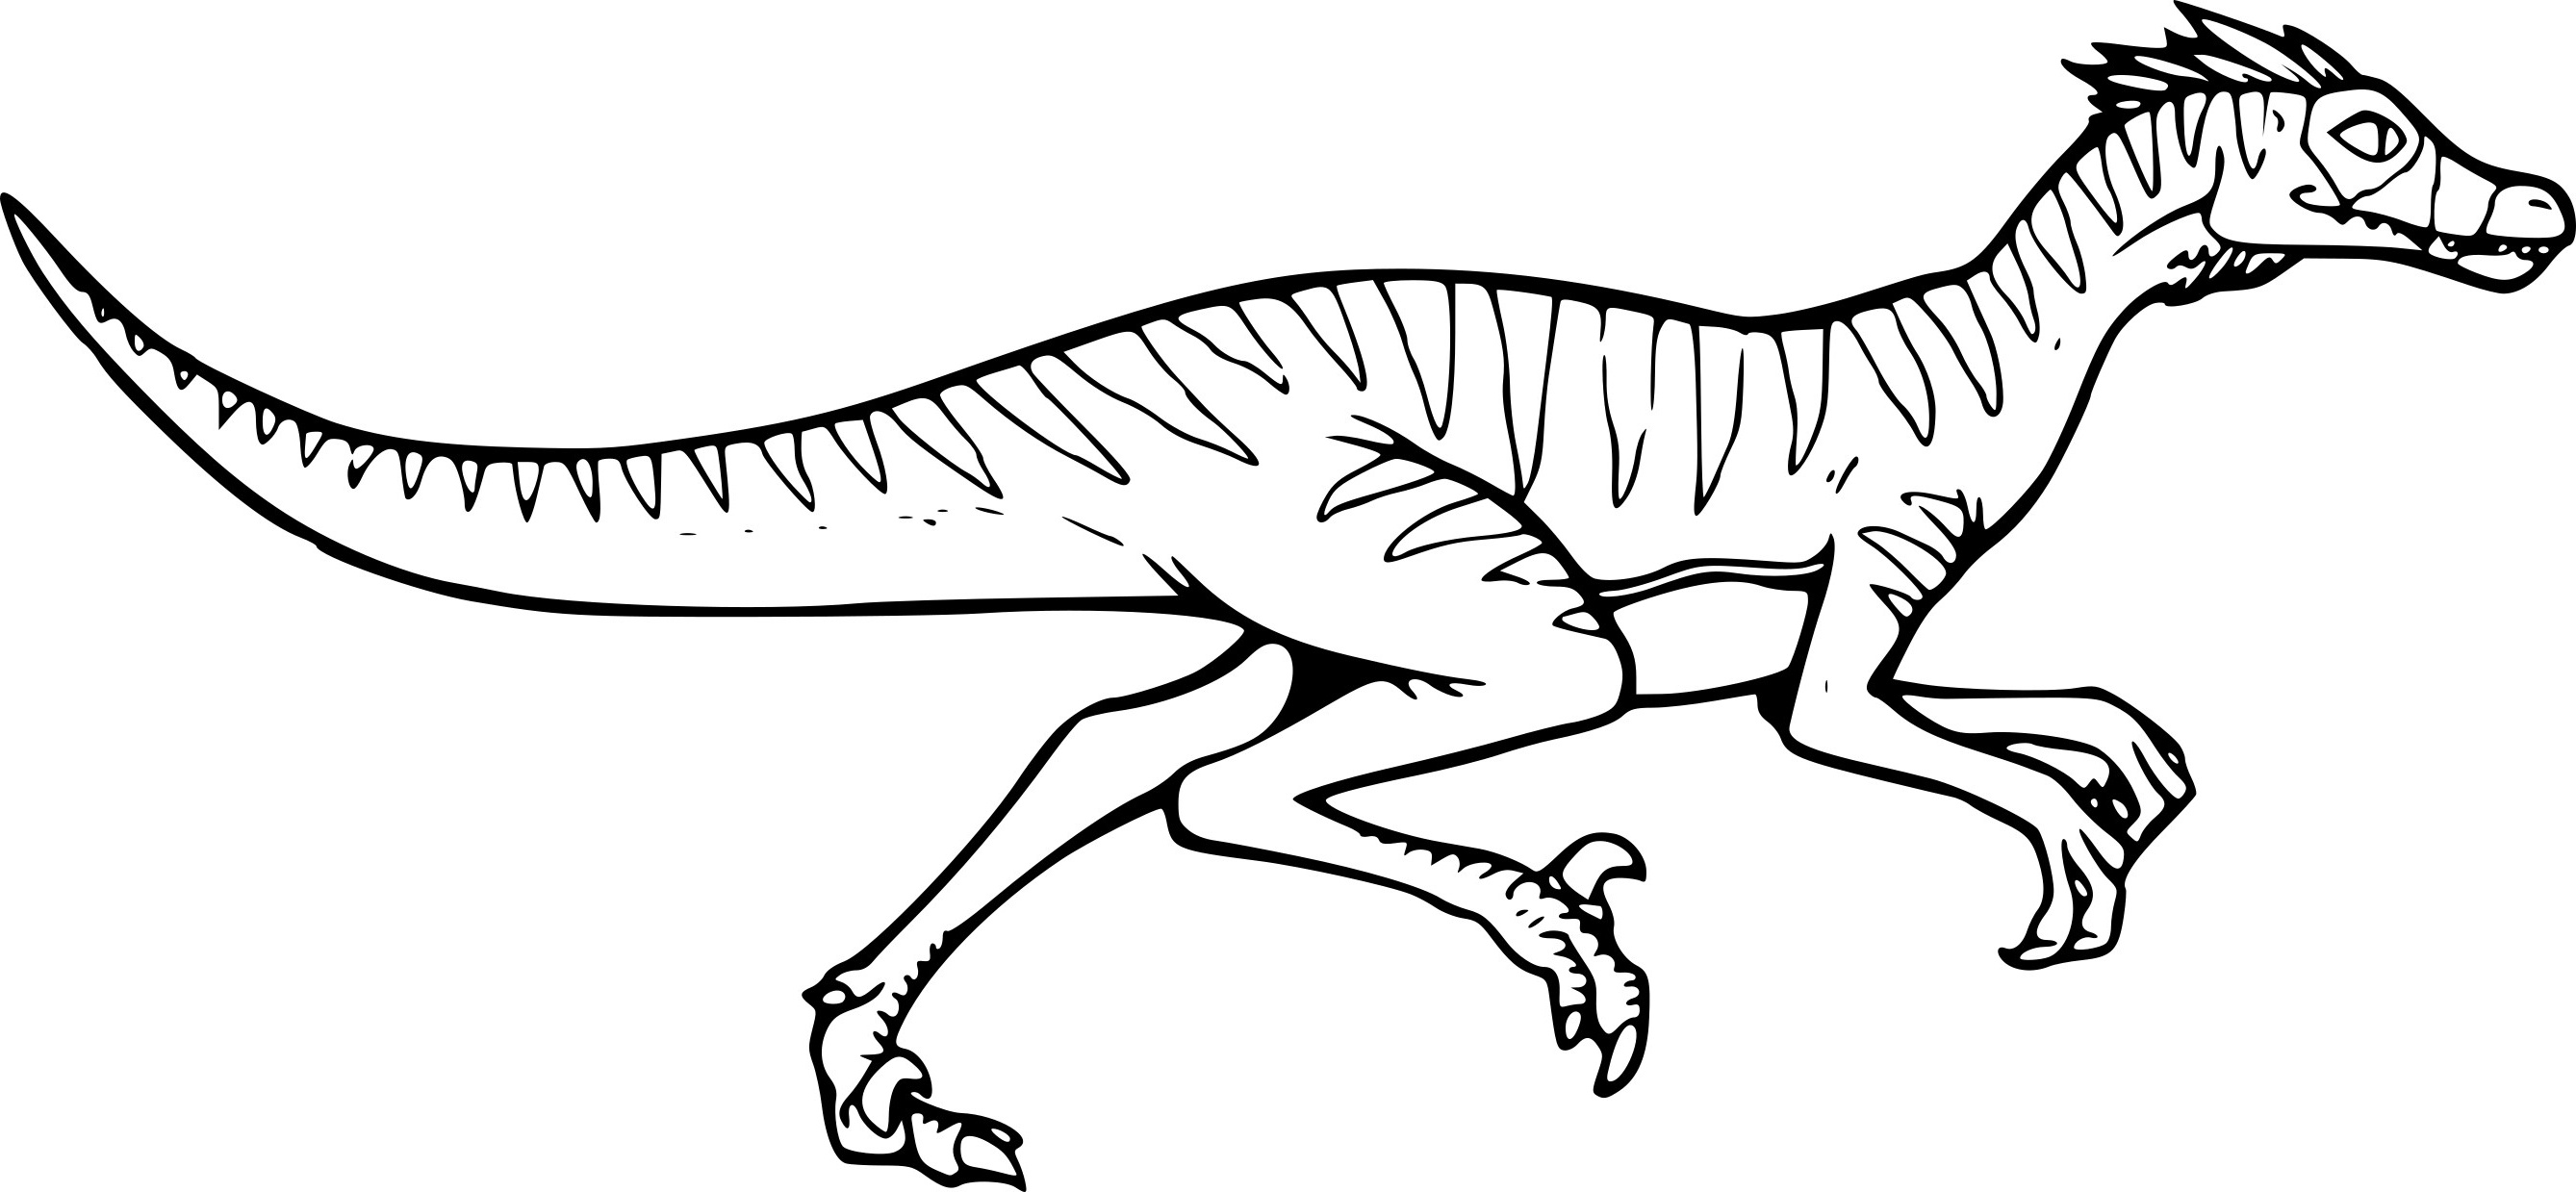 Dessin Légo Beau Collection Lego Coloring Pages Velociraptor Coloring Pages